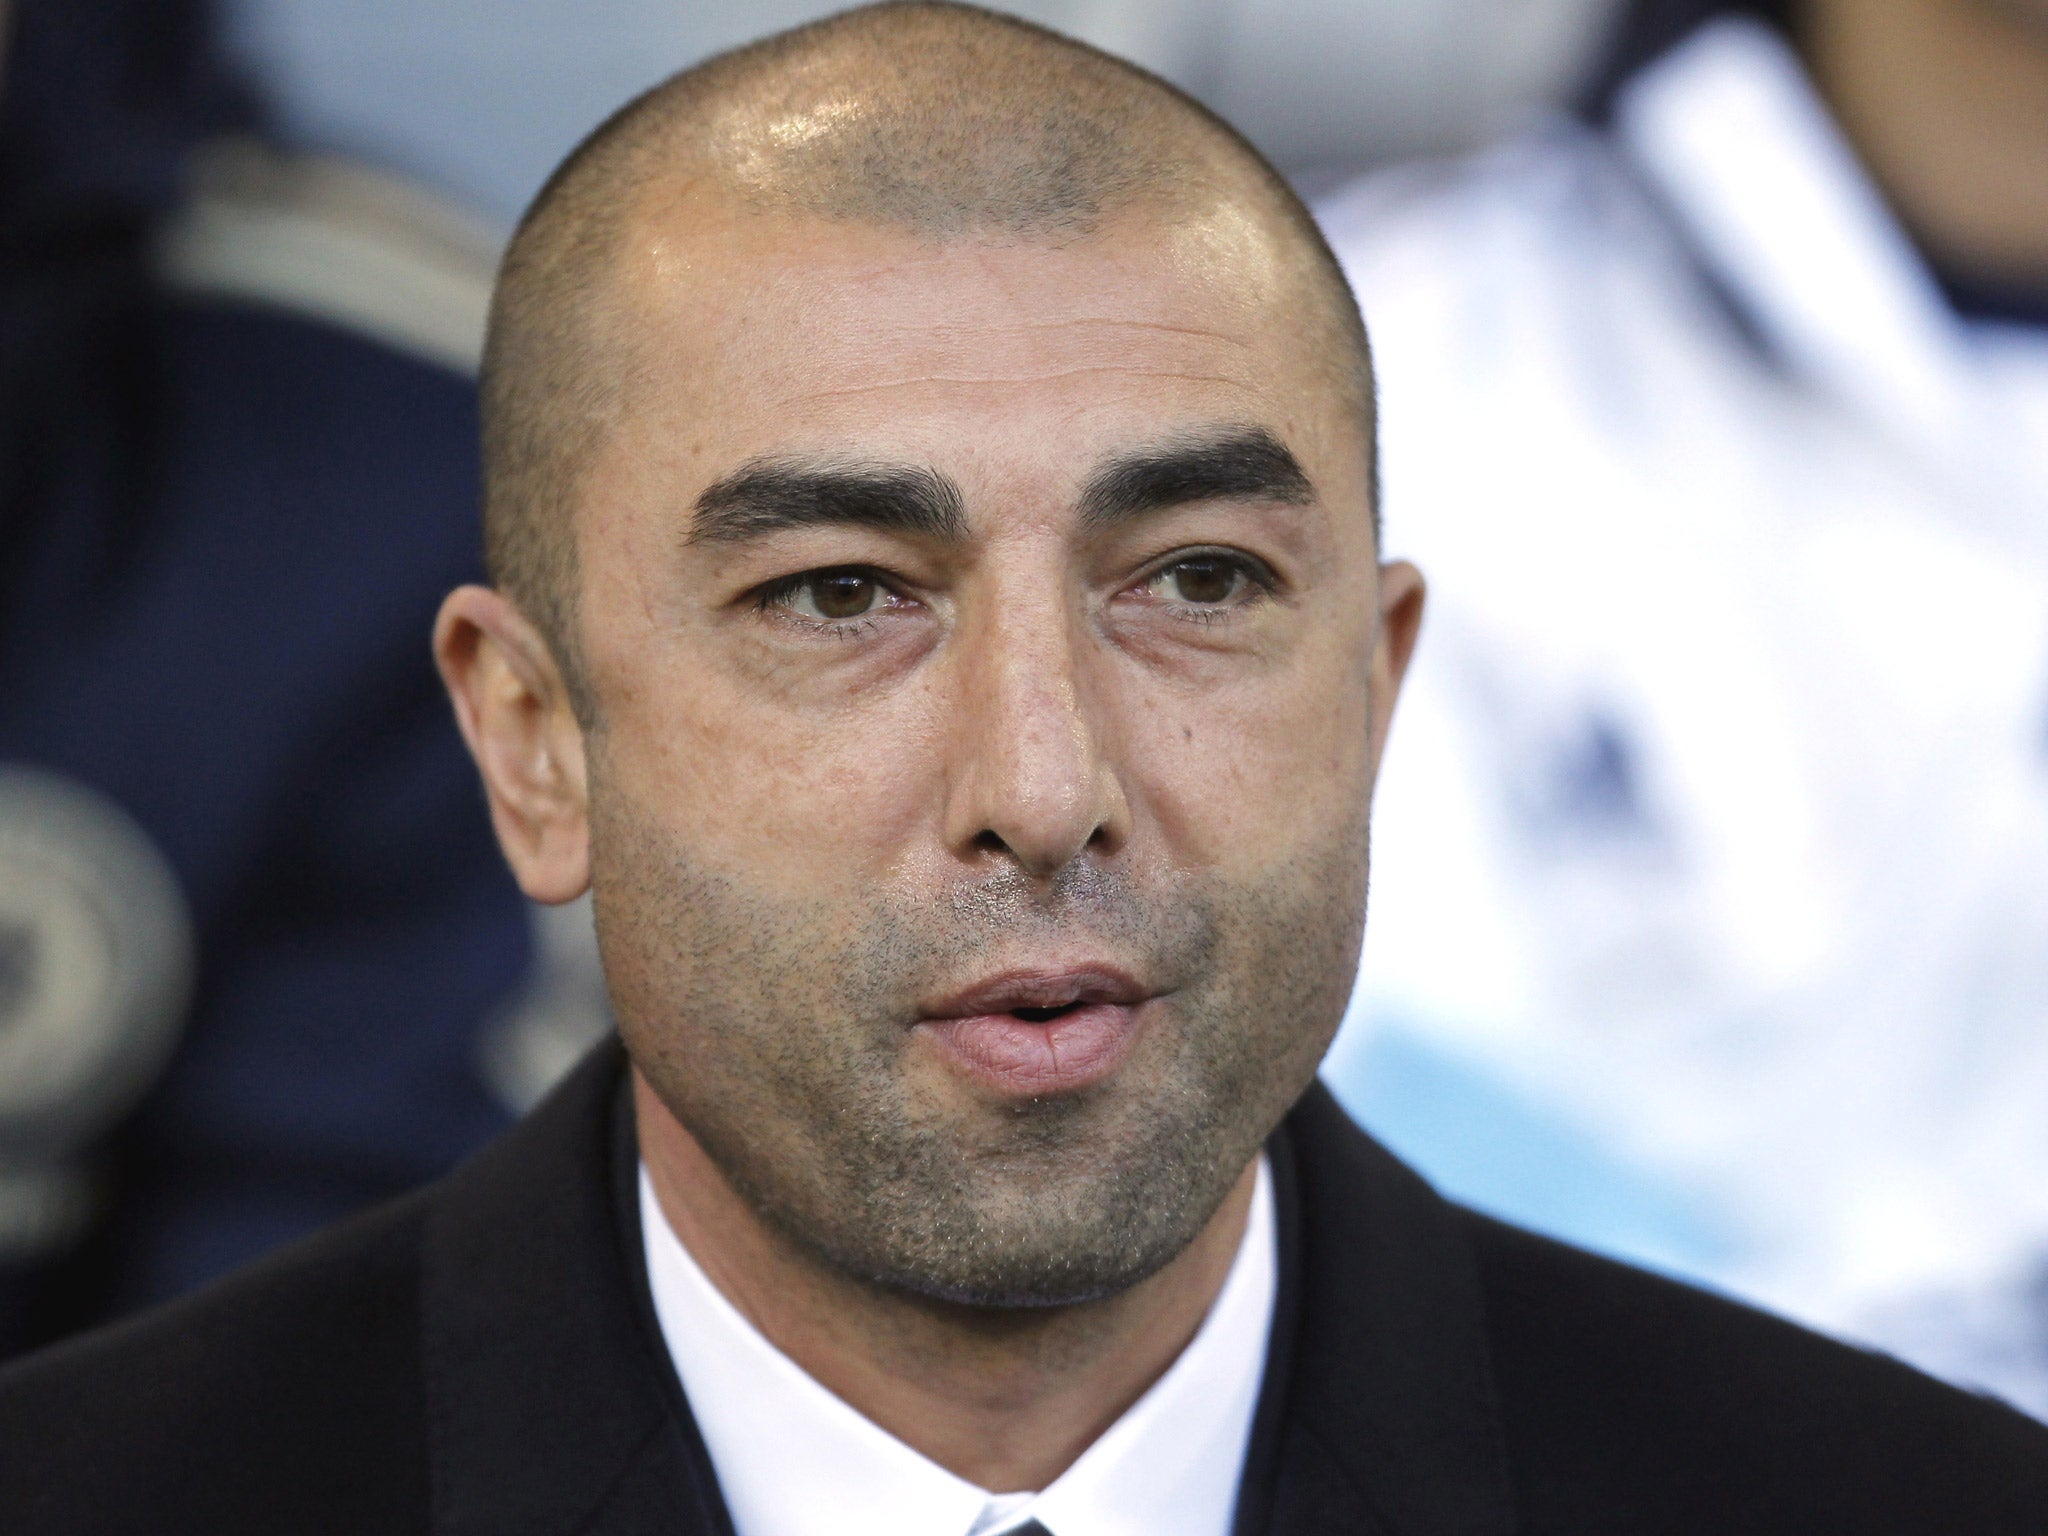 Di Matteo was reluctantly appointed as manager in spite of last season's Champions League success